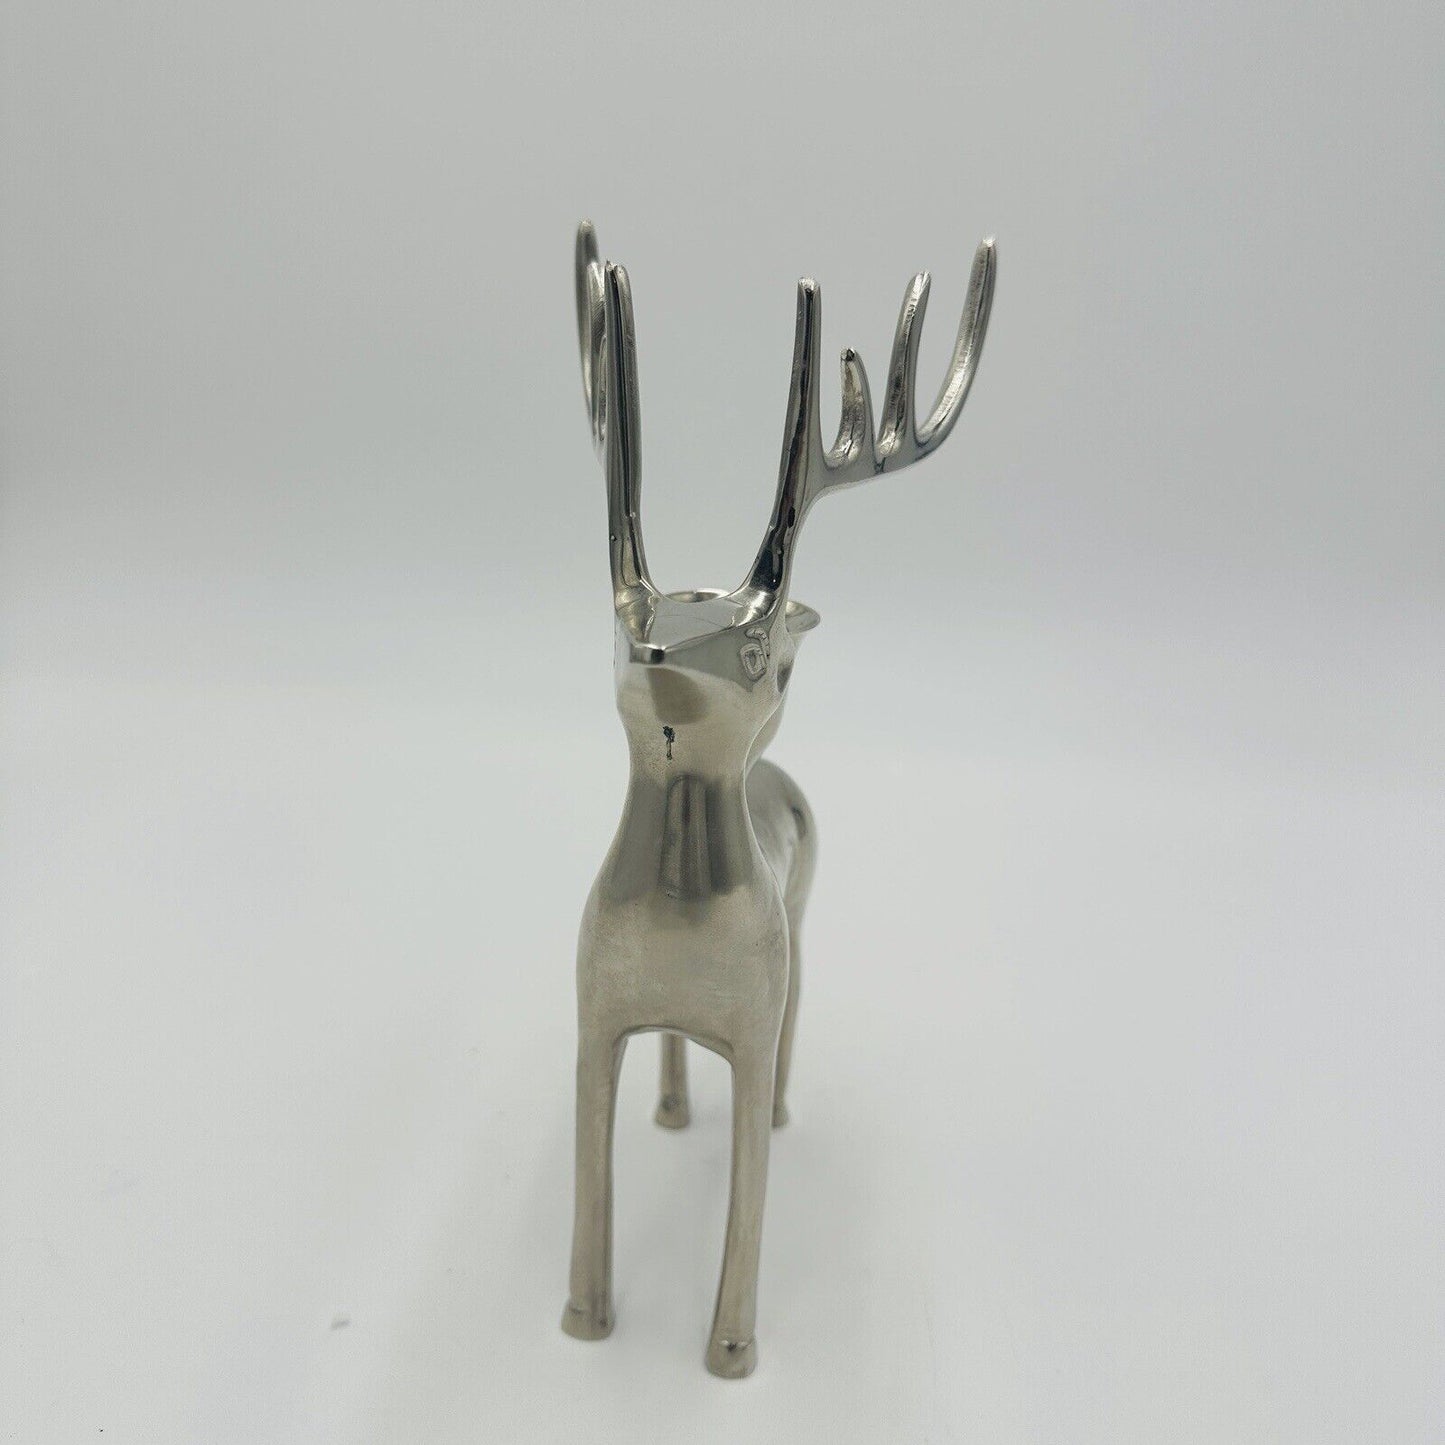 Pottery Barn Vintage Silver Plated Reindeer Taper Candle Holders Seasonal Stag